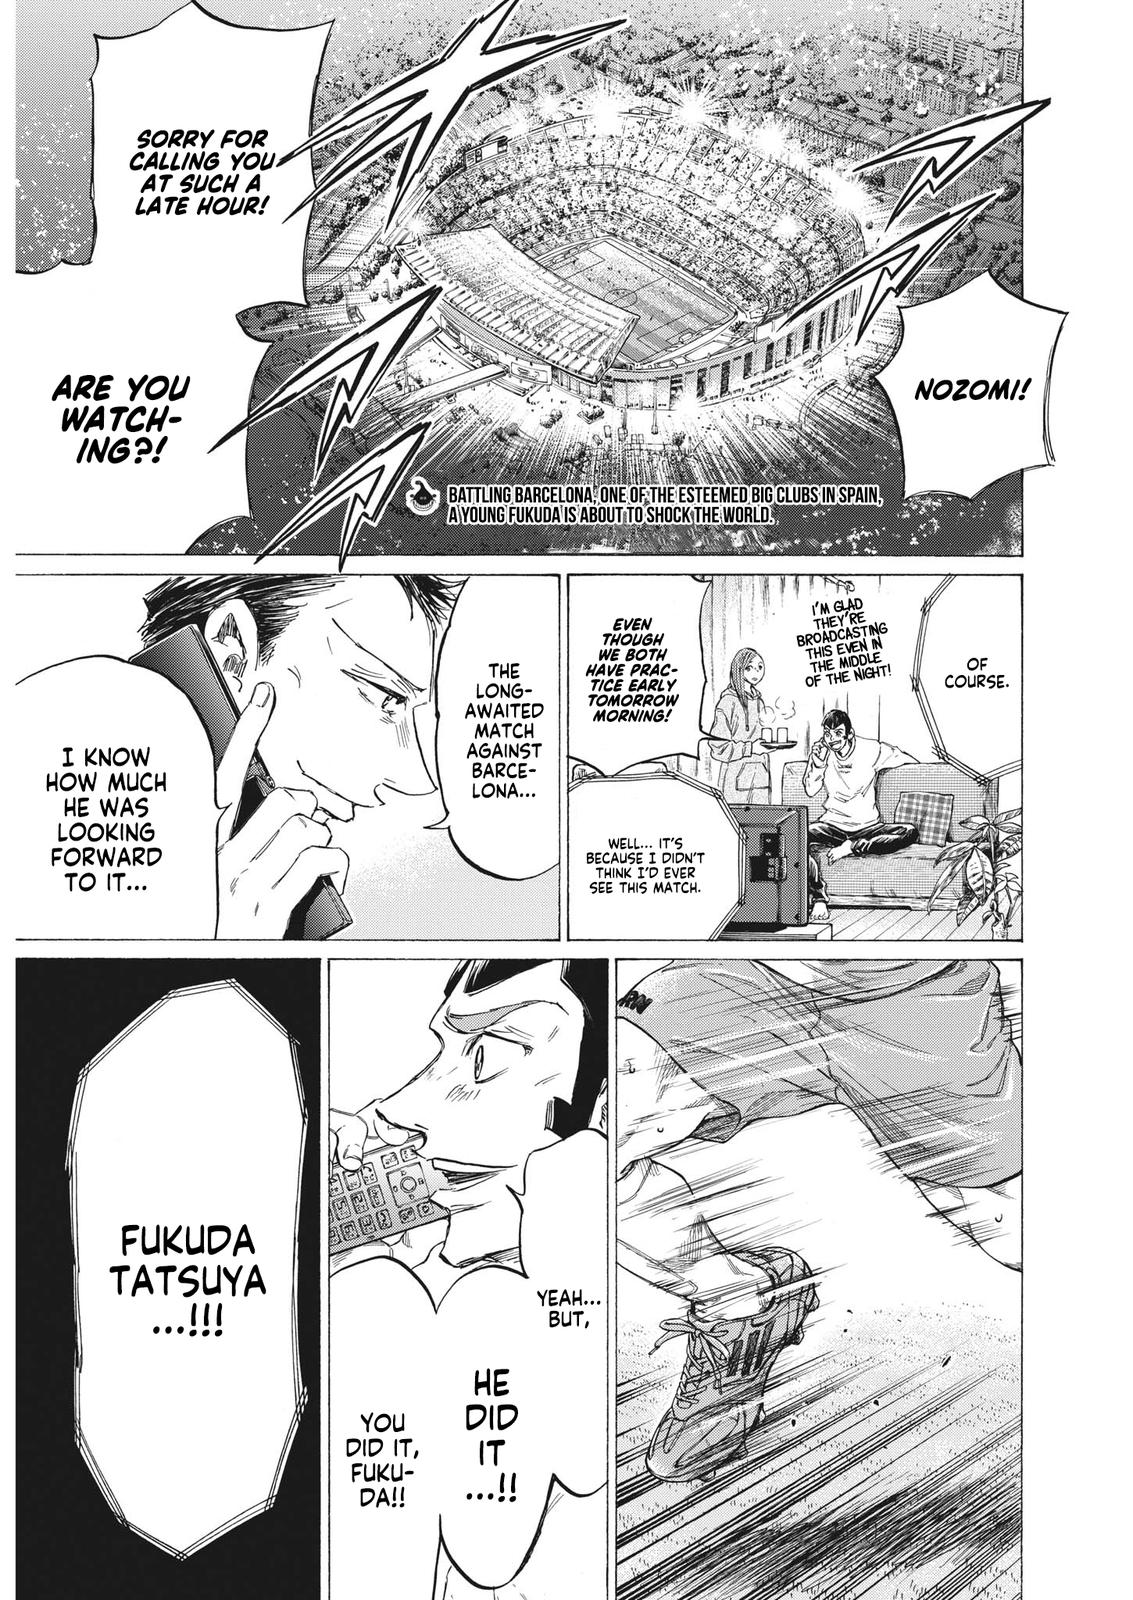 Ao Ashi, Chapter 315  TcbScans Org - Free Manga Online in High Quality